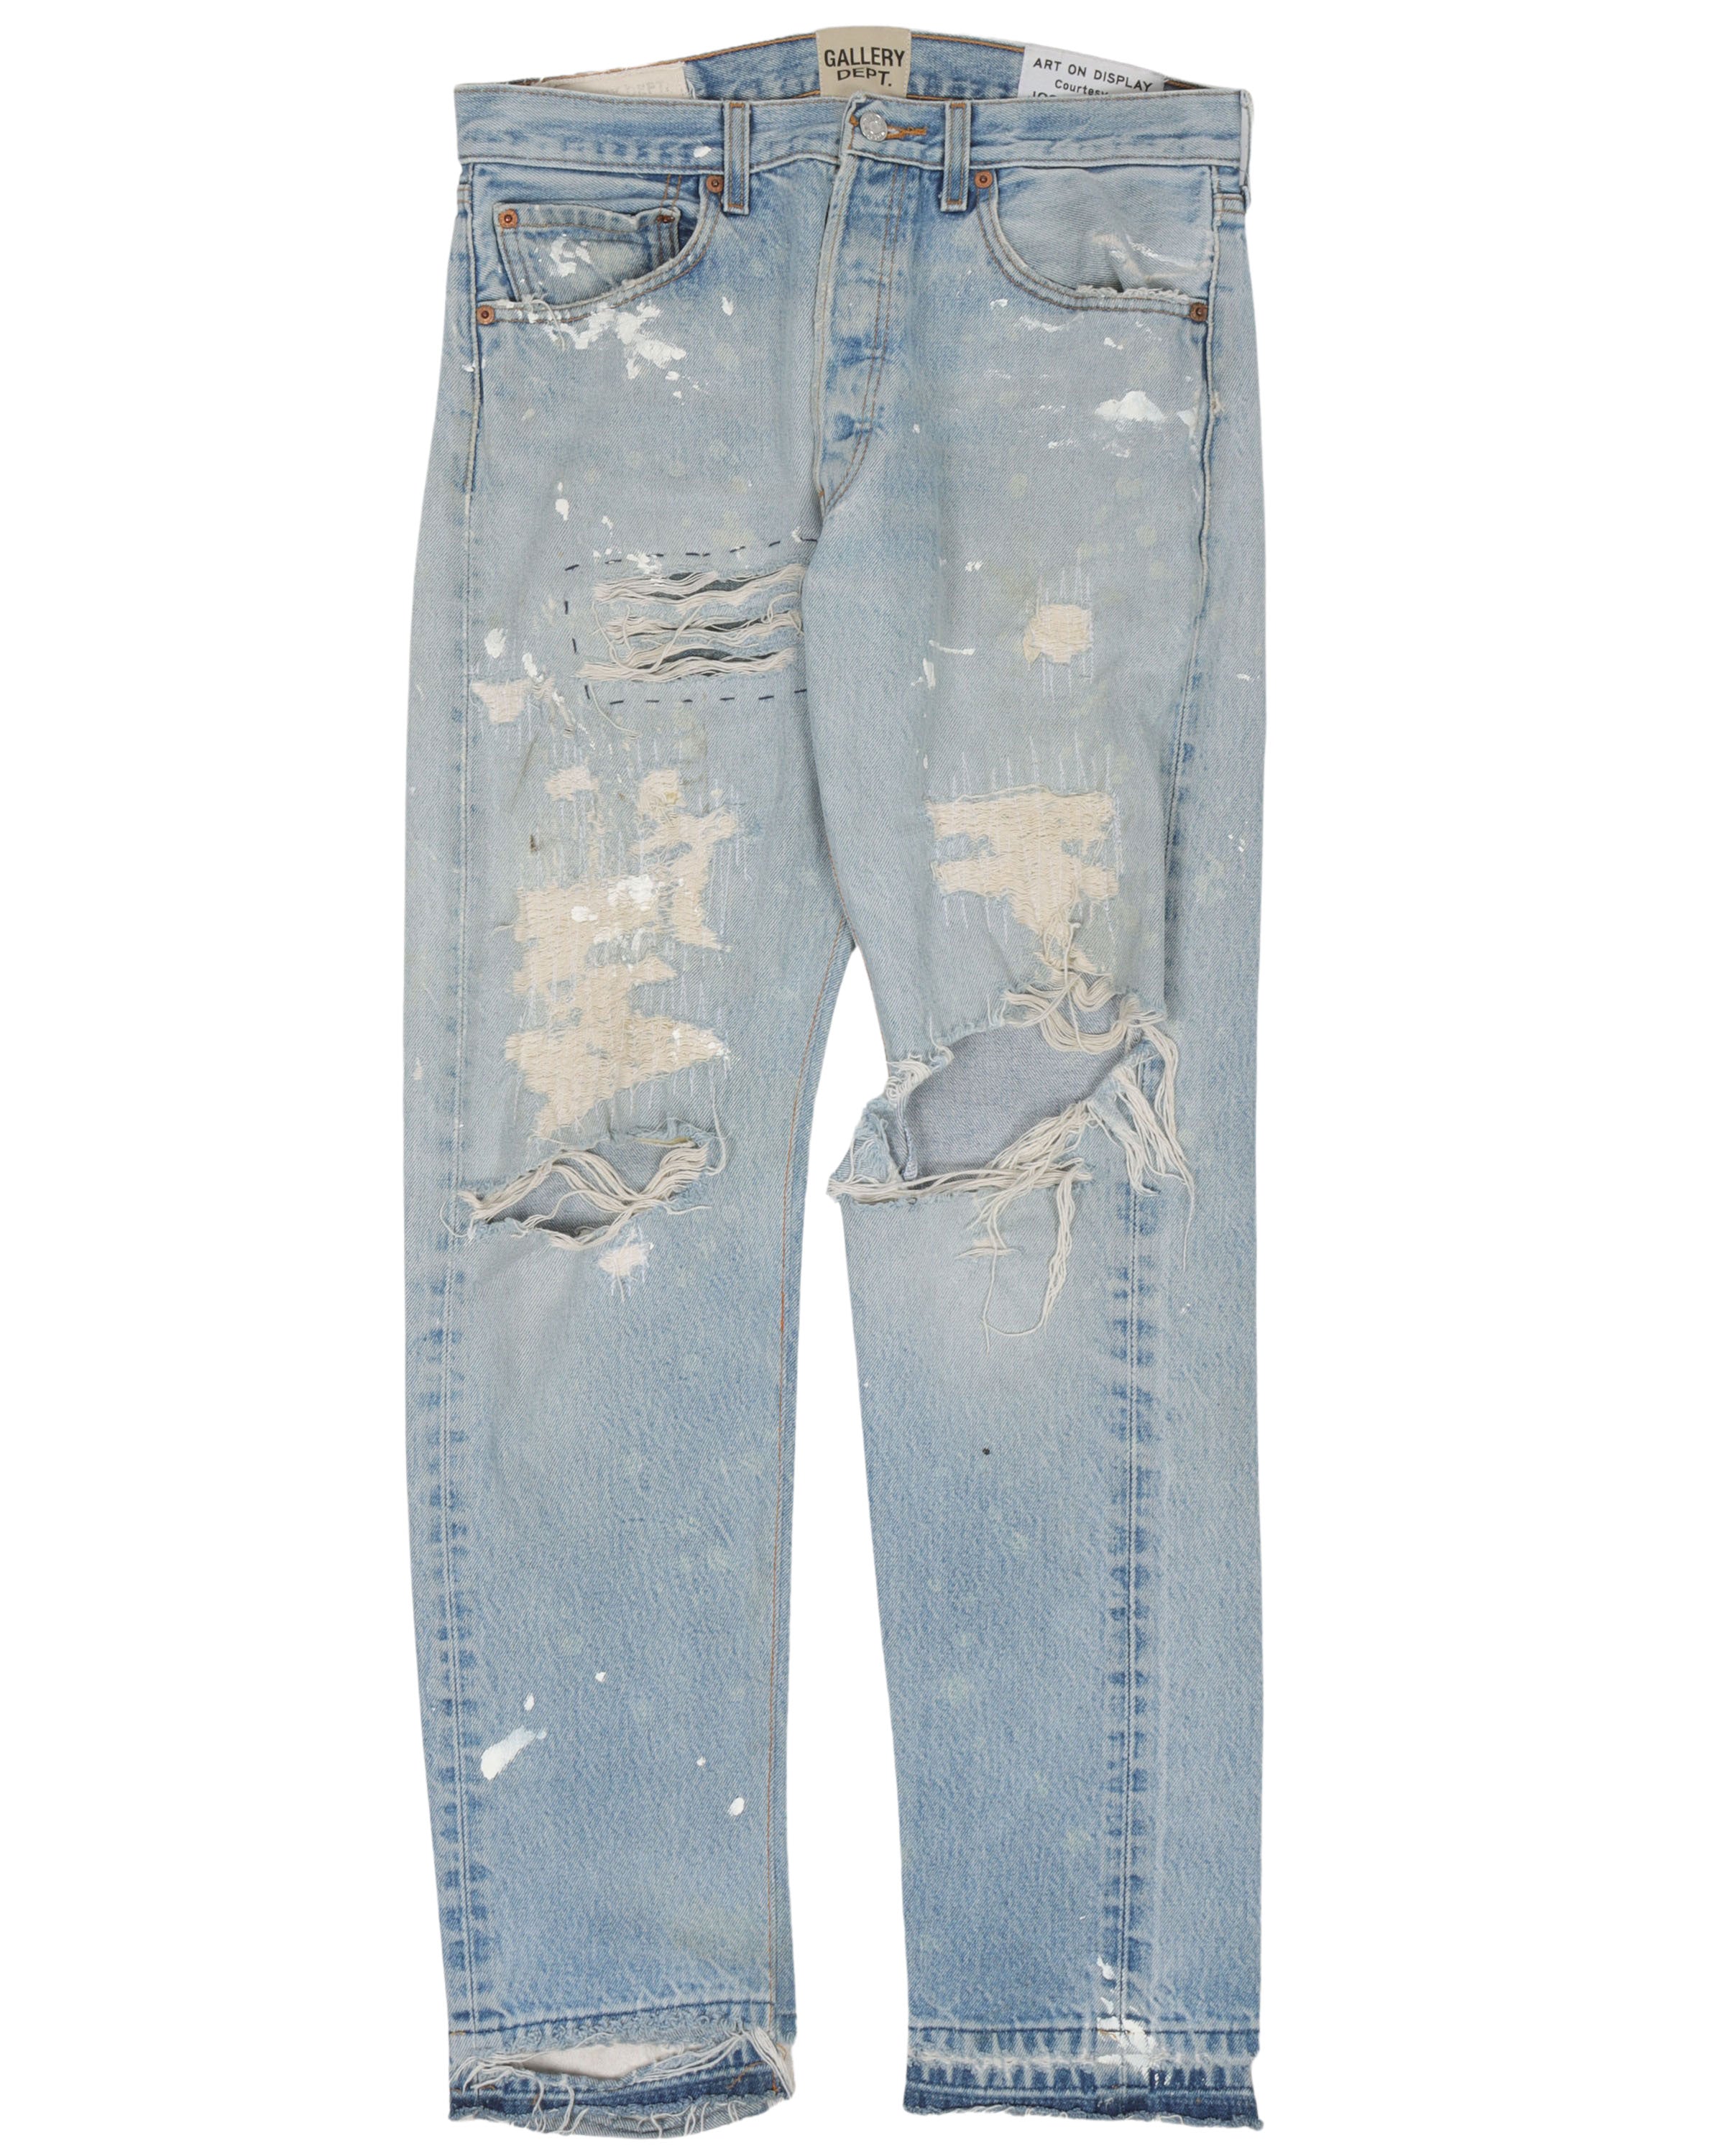 Gallery Dept. Indian Jeans